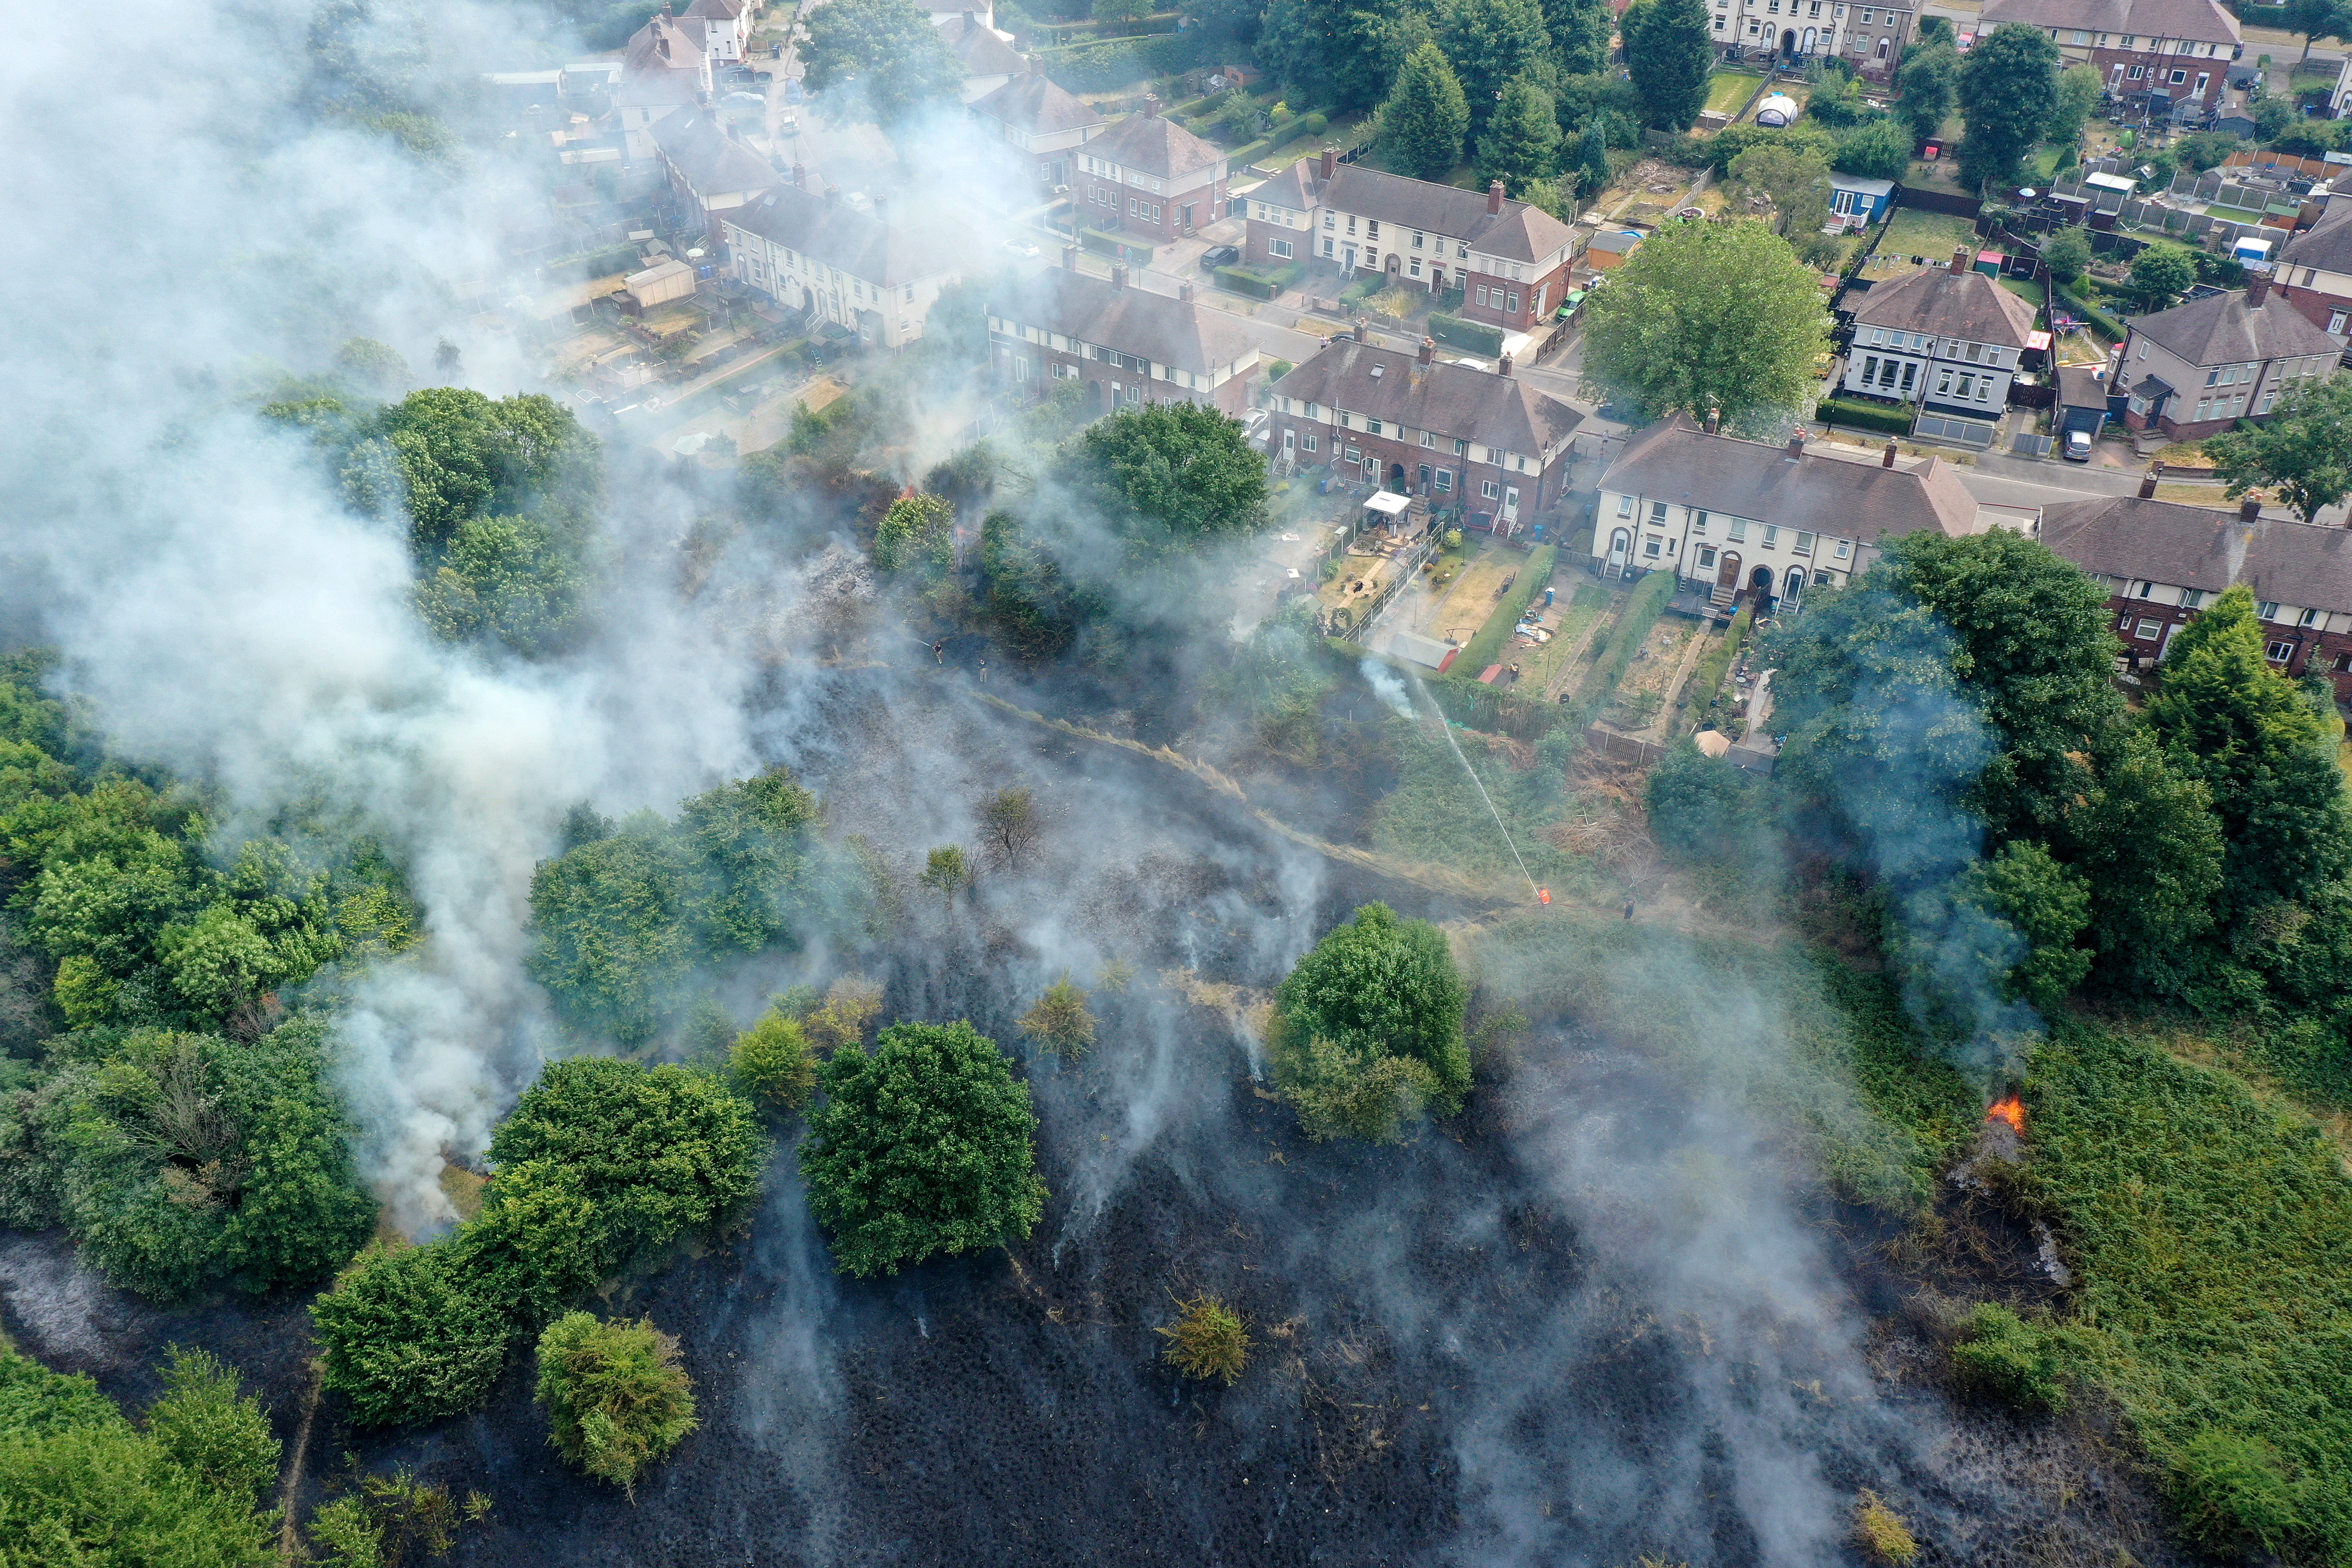 Firefighters contain a wildfire that encroached on nearby homes in the Shiregreen area of Sheffield on July 20, 2022